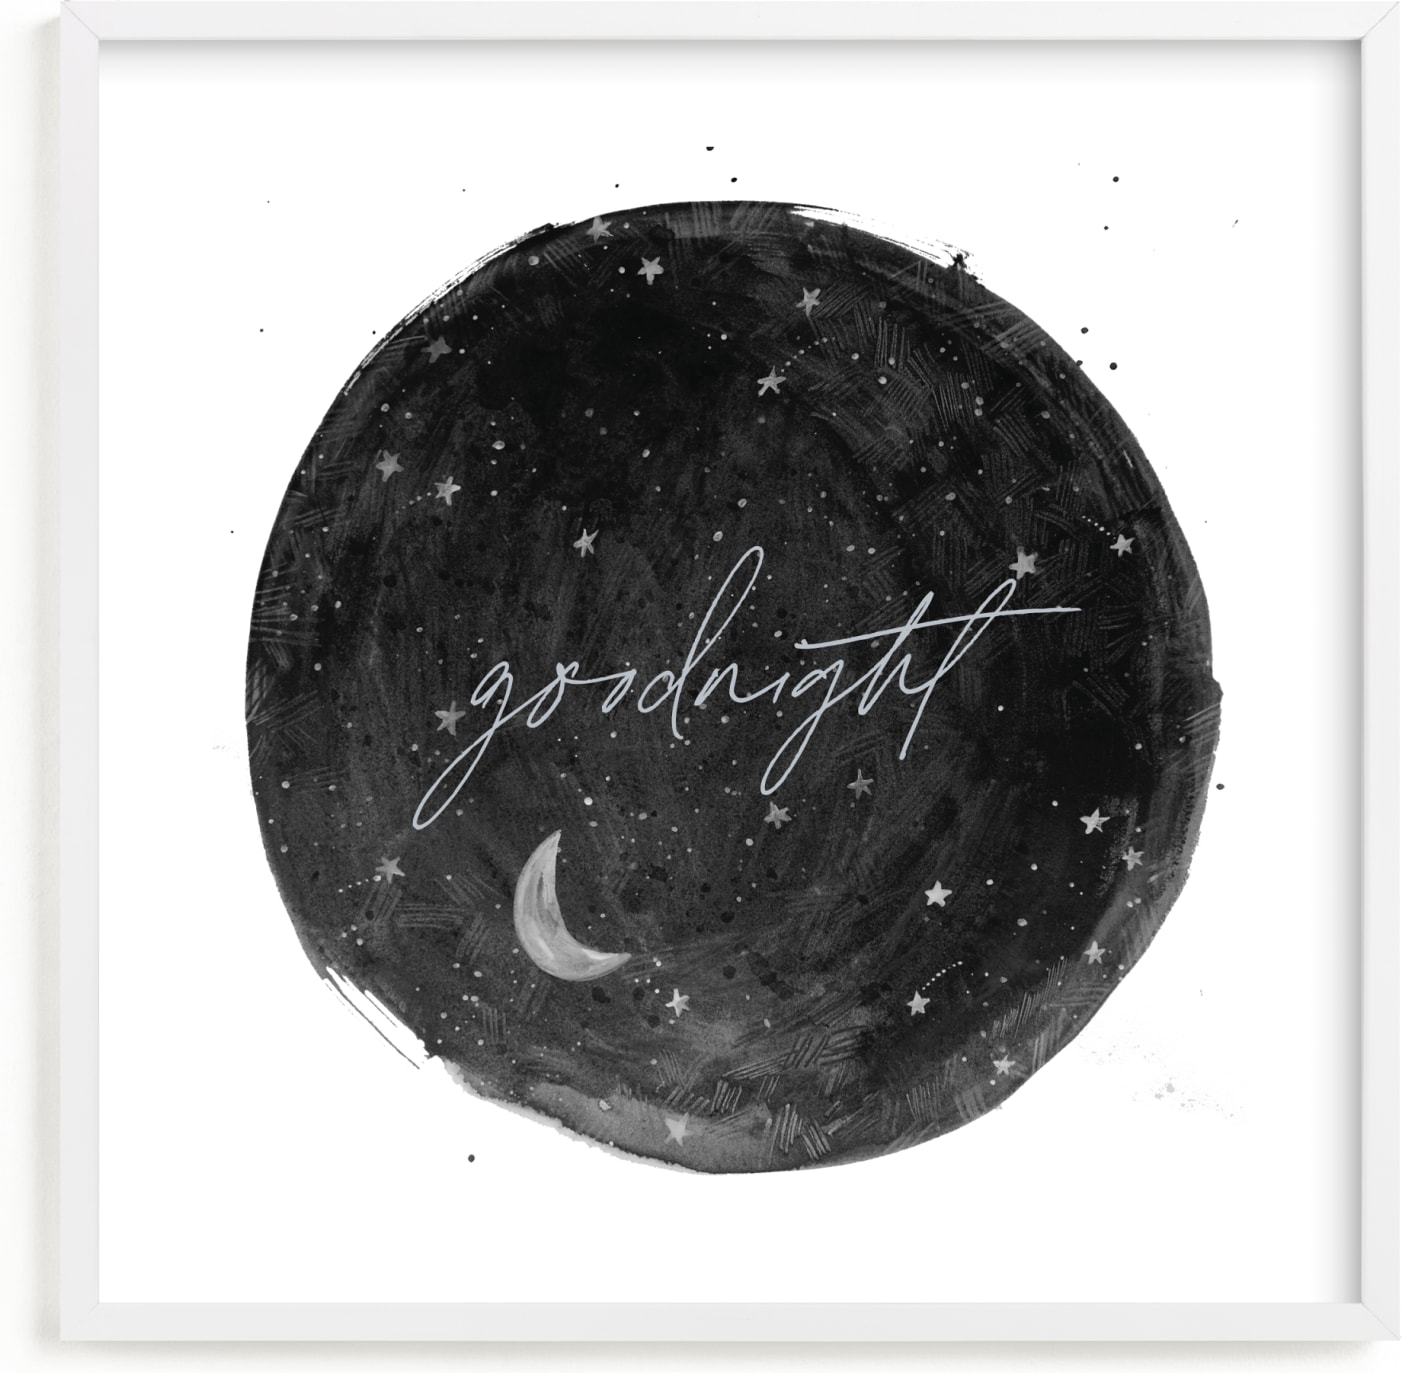 This is a black and white nursery wall art by Krissy Bengtson called Constellations.